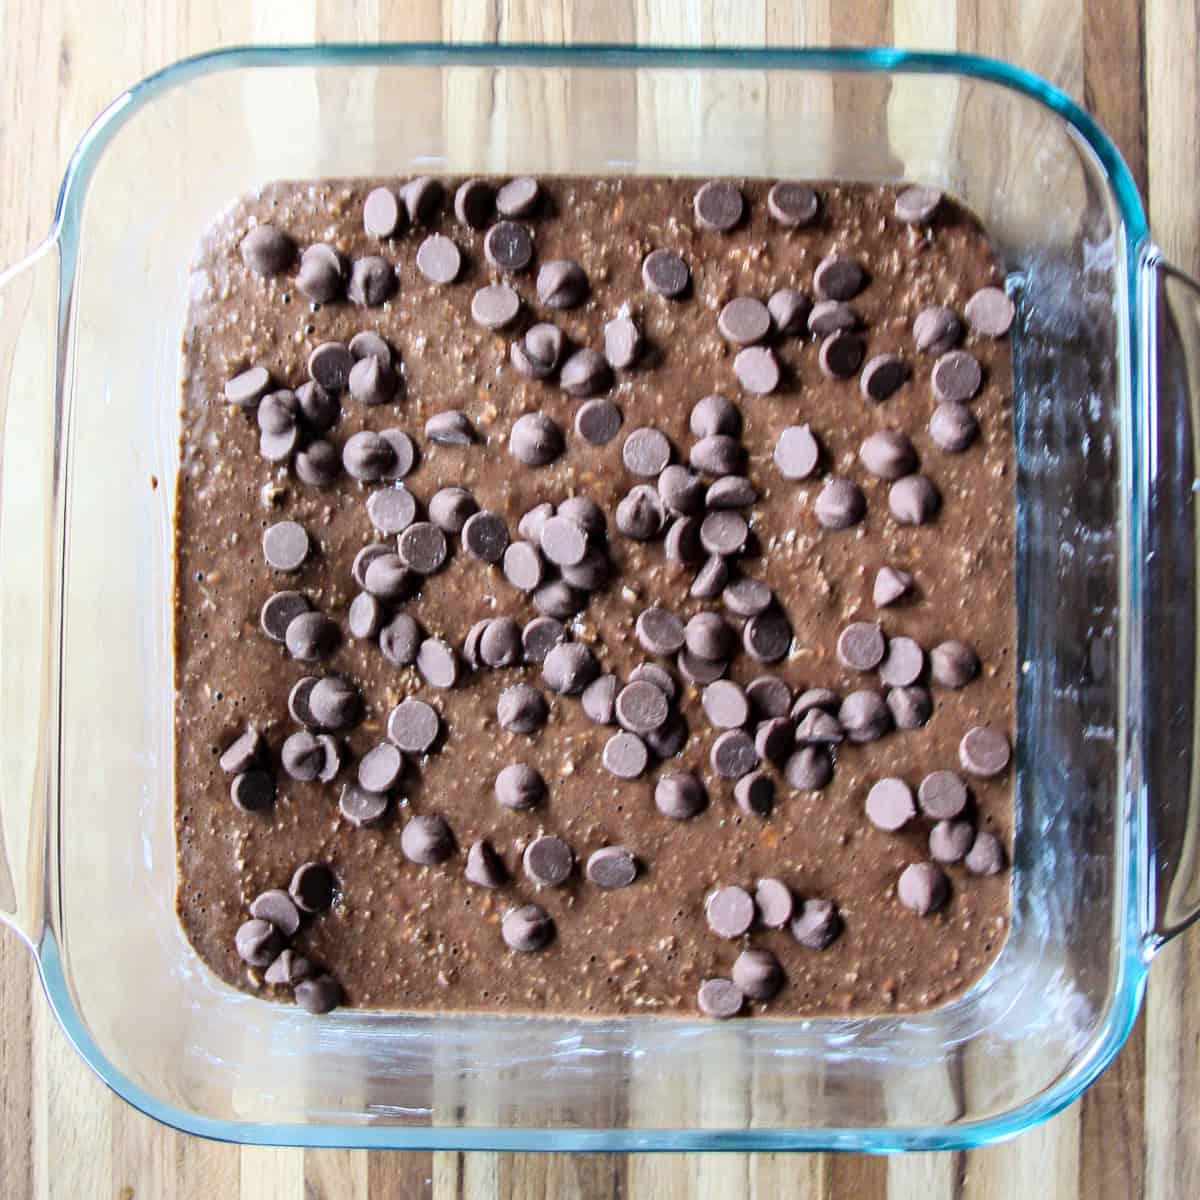 The batter spread into a glass baking dish and sprinkled with chocolate chips.